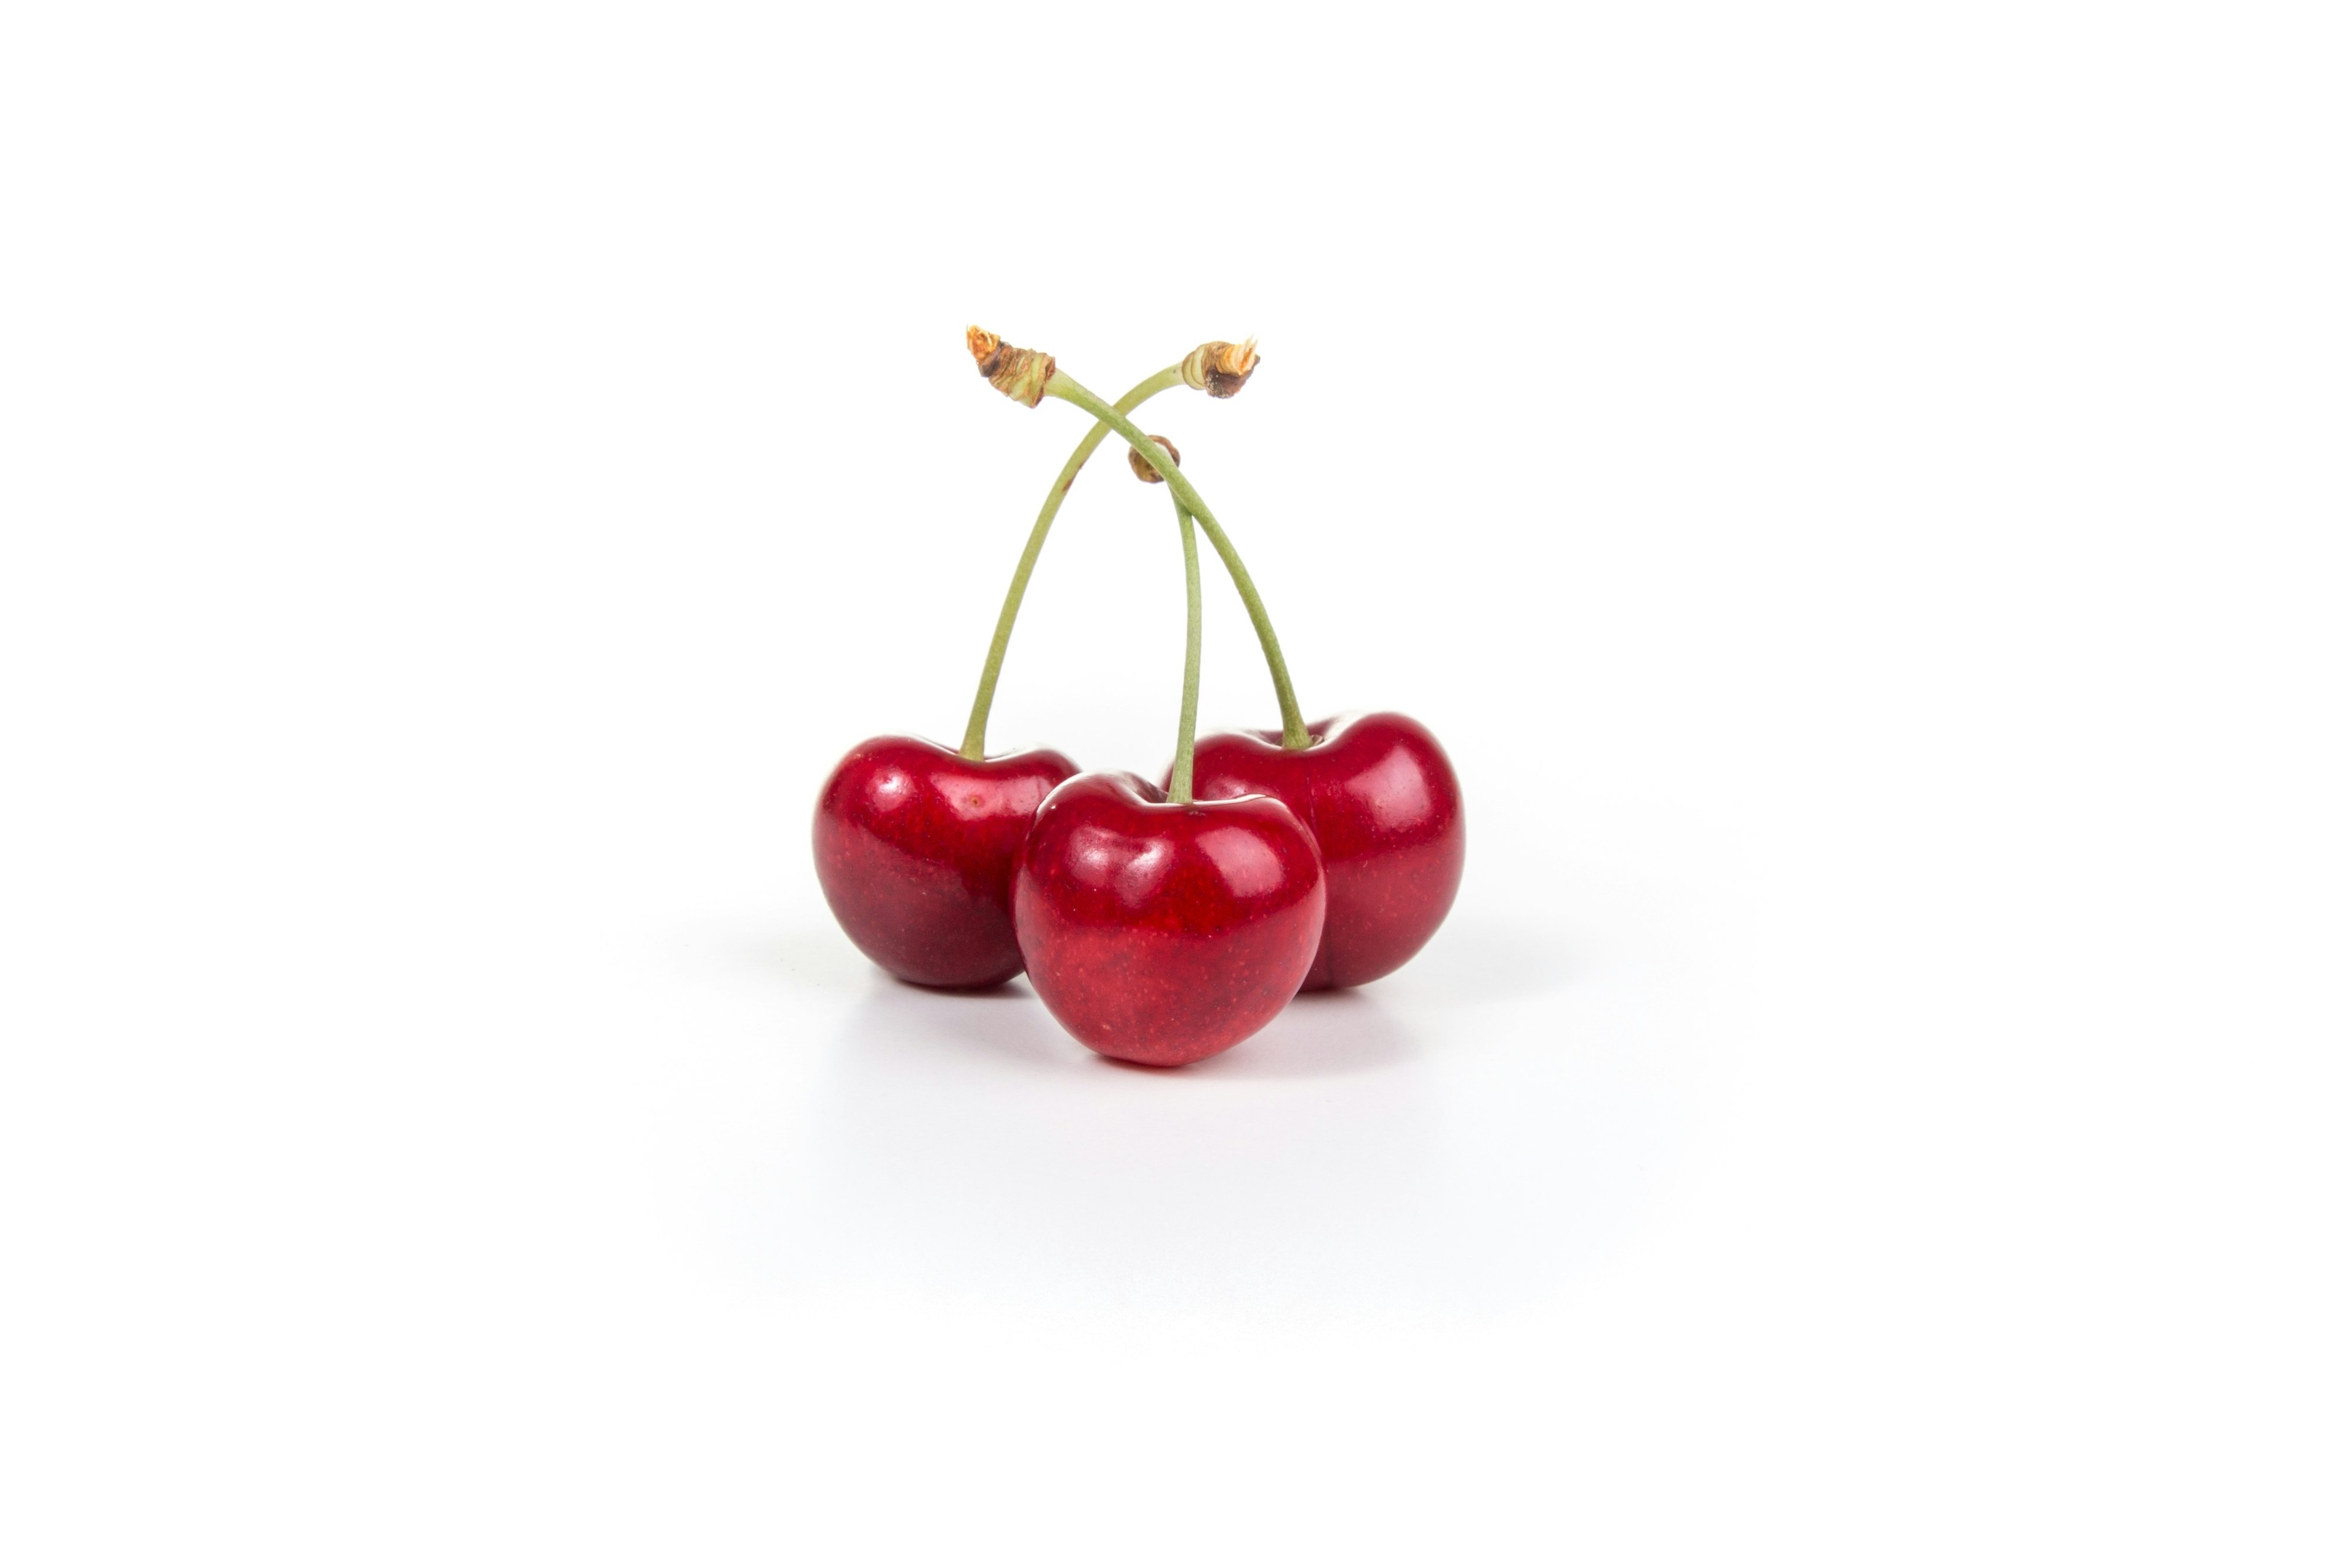 Tart cherries come with recovery-enhancing and performance-boosting benefits for natural athletes.